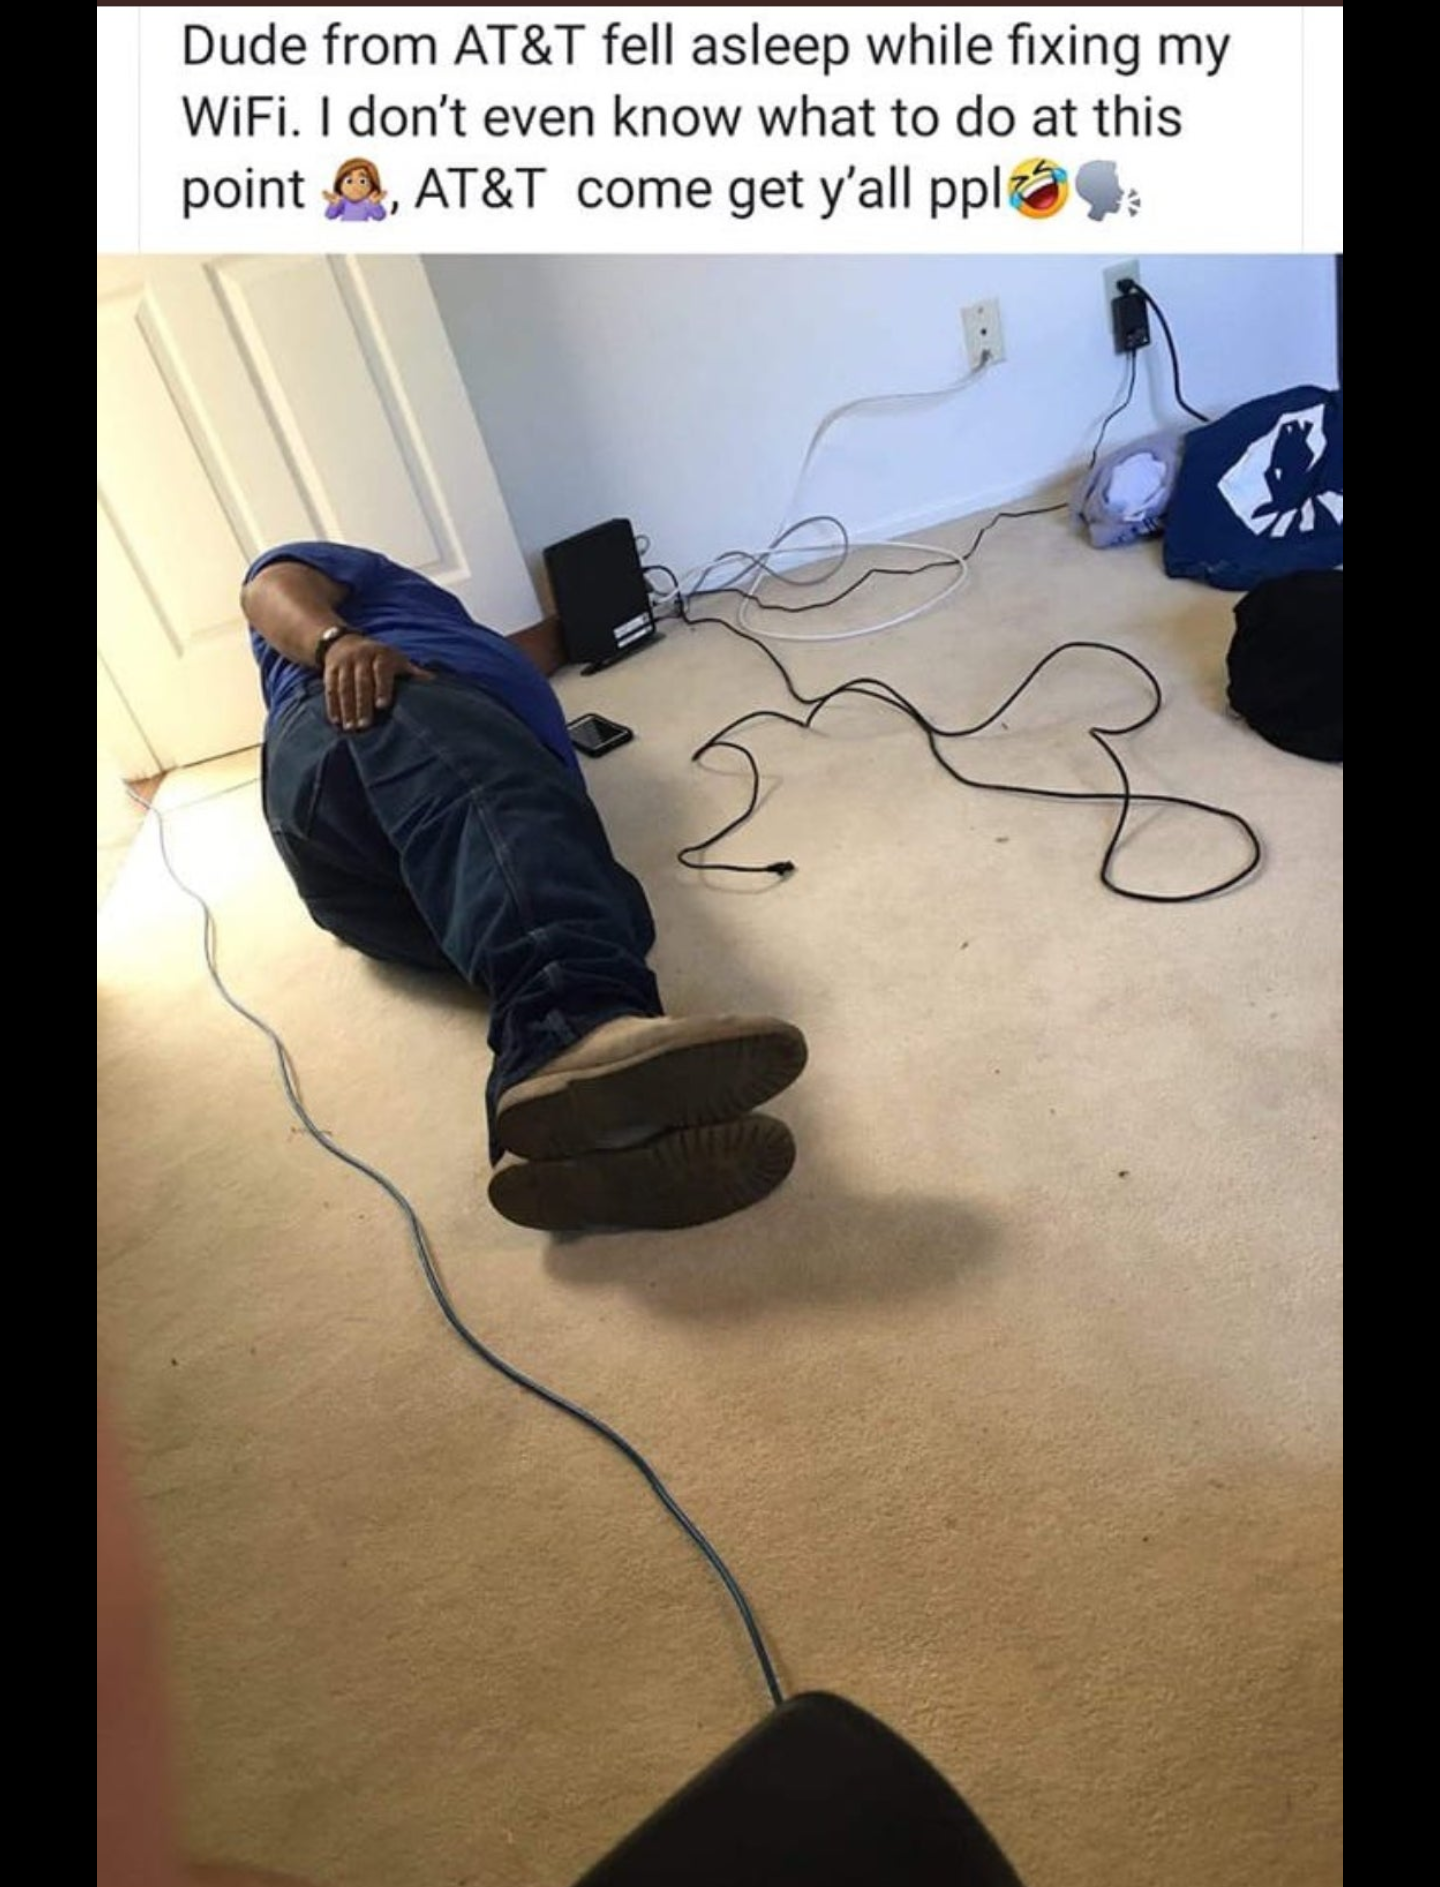 dude from comcast fell asleep - Dude from At&T fell asleep while fixing my WiFi. I don't even know what to do at this point A, At&T come get y'all ppl